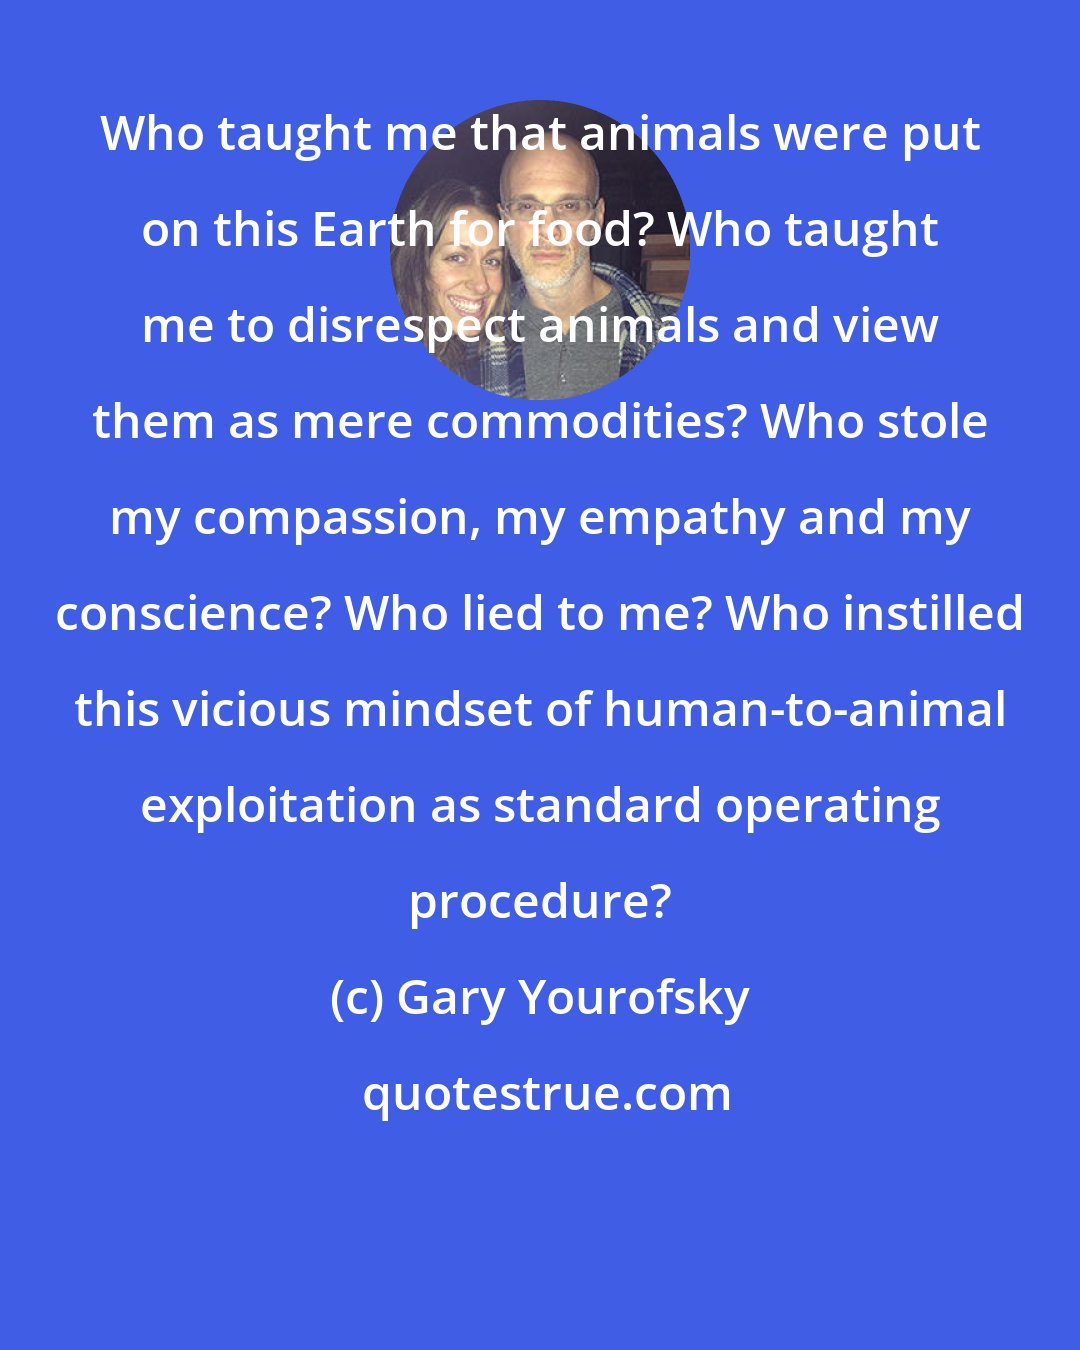 Gary Yourofsky: Who taught me that animals were put on this Earth for food? Who taught me to disrespect animals and view them as mere commodities? Who stole my compassion, my empathy and my conscience? Who lied to me? Who instilled this vicious mindset of human-to-animal exploitation as standard operating procedure?